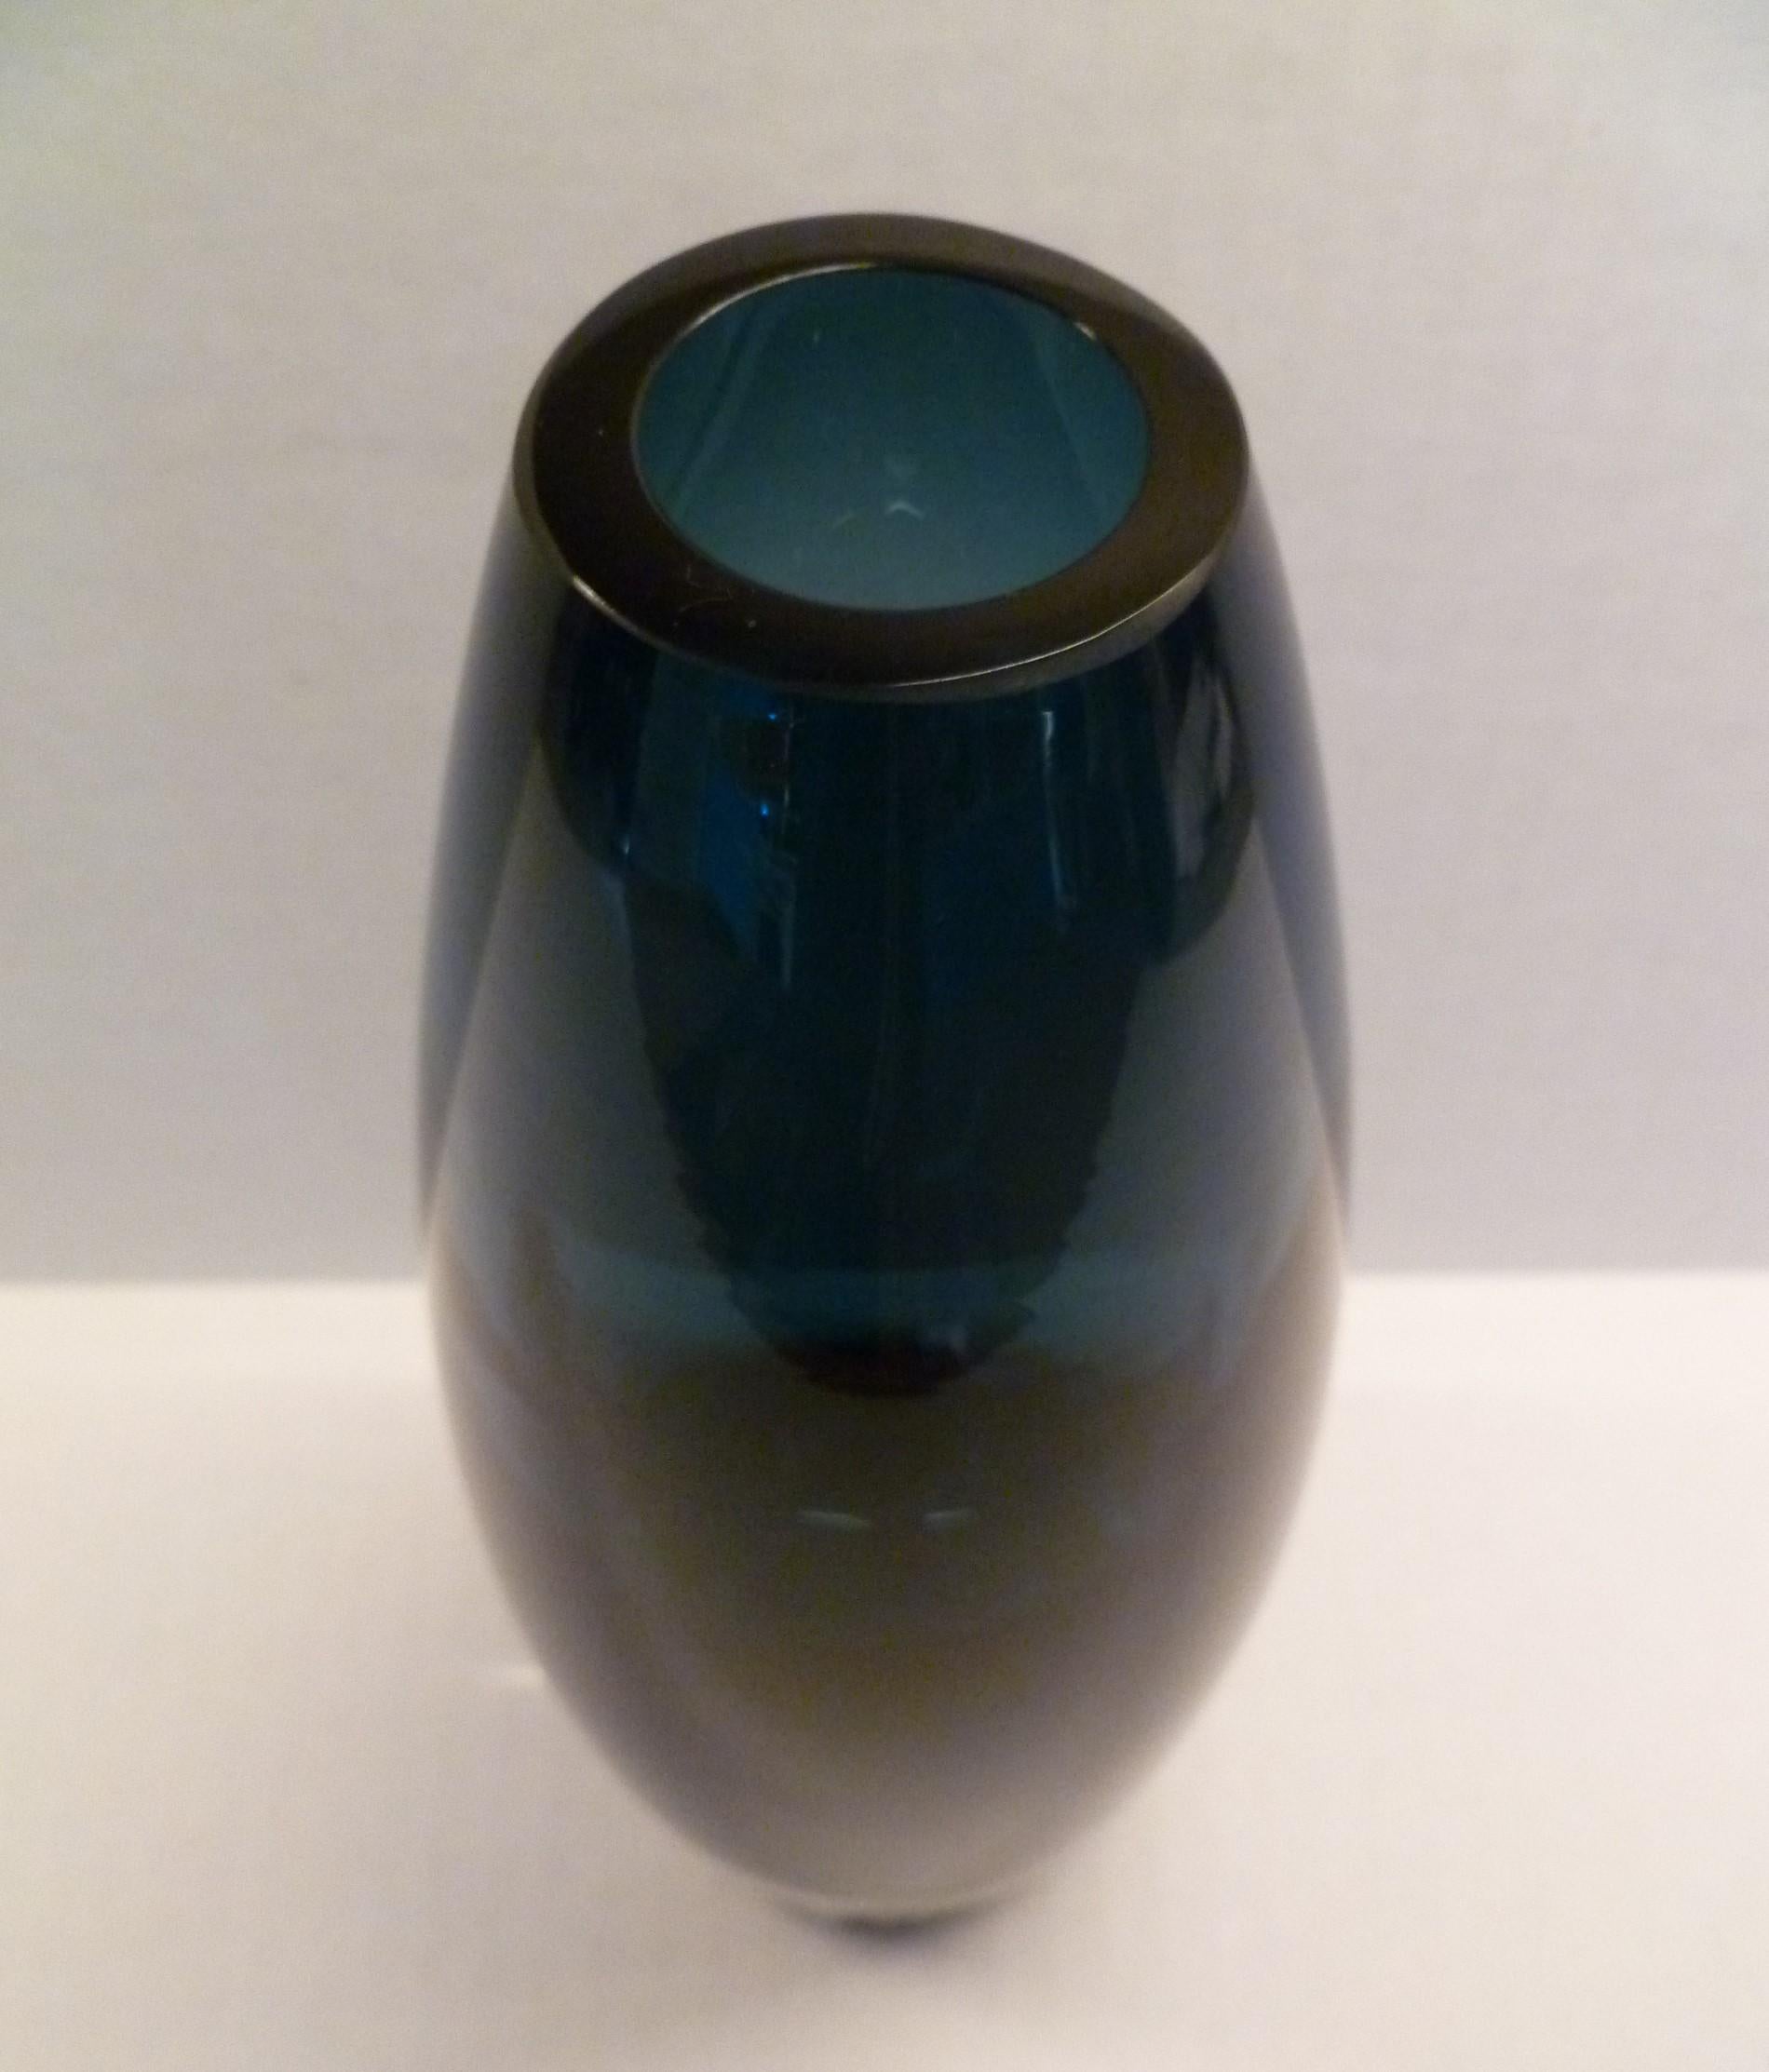 Tamara Aladin, b.1932, designed this vase early in her tenure with Riihimäki Glass Factory of Finland. Riihimäen Lasi Oy became well known for its modern colorful and innovative Space Age shapes created by designers like Aladin. This listing is for